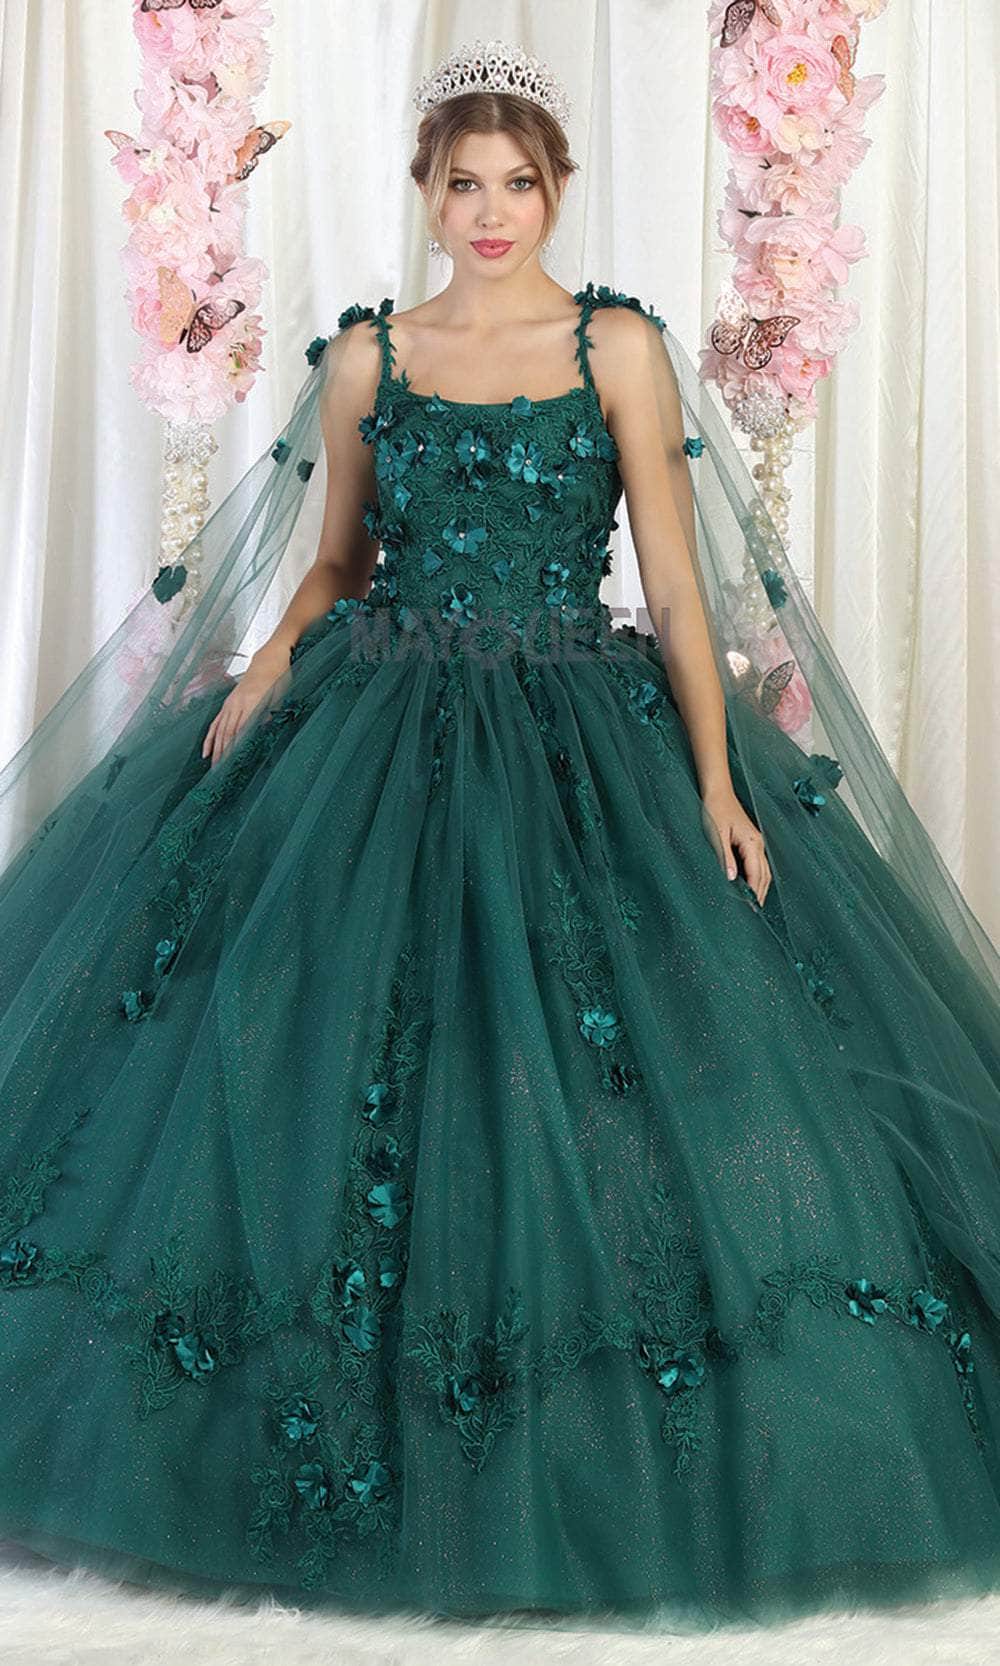 Image of May Queen LK185 - Floral Appliqued Sleeveless Ballgown